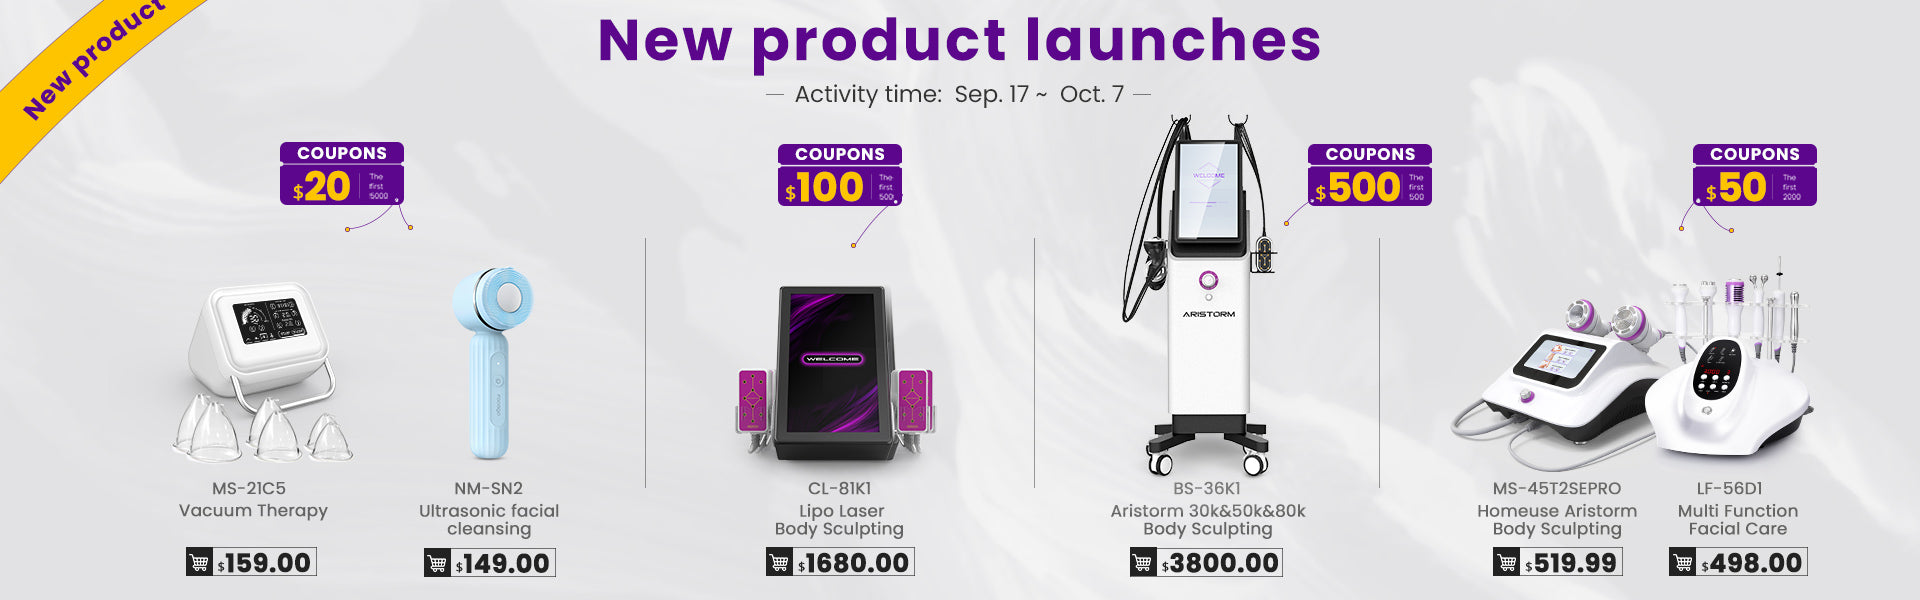 new product launches